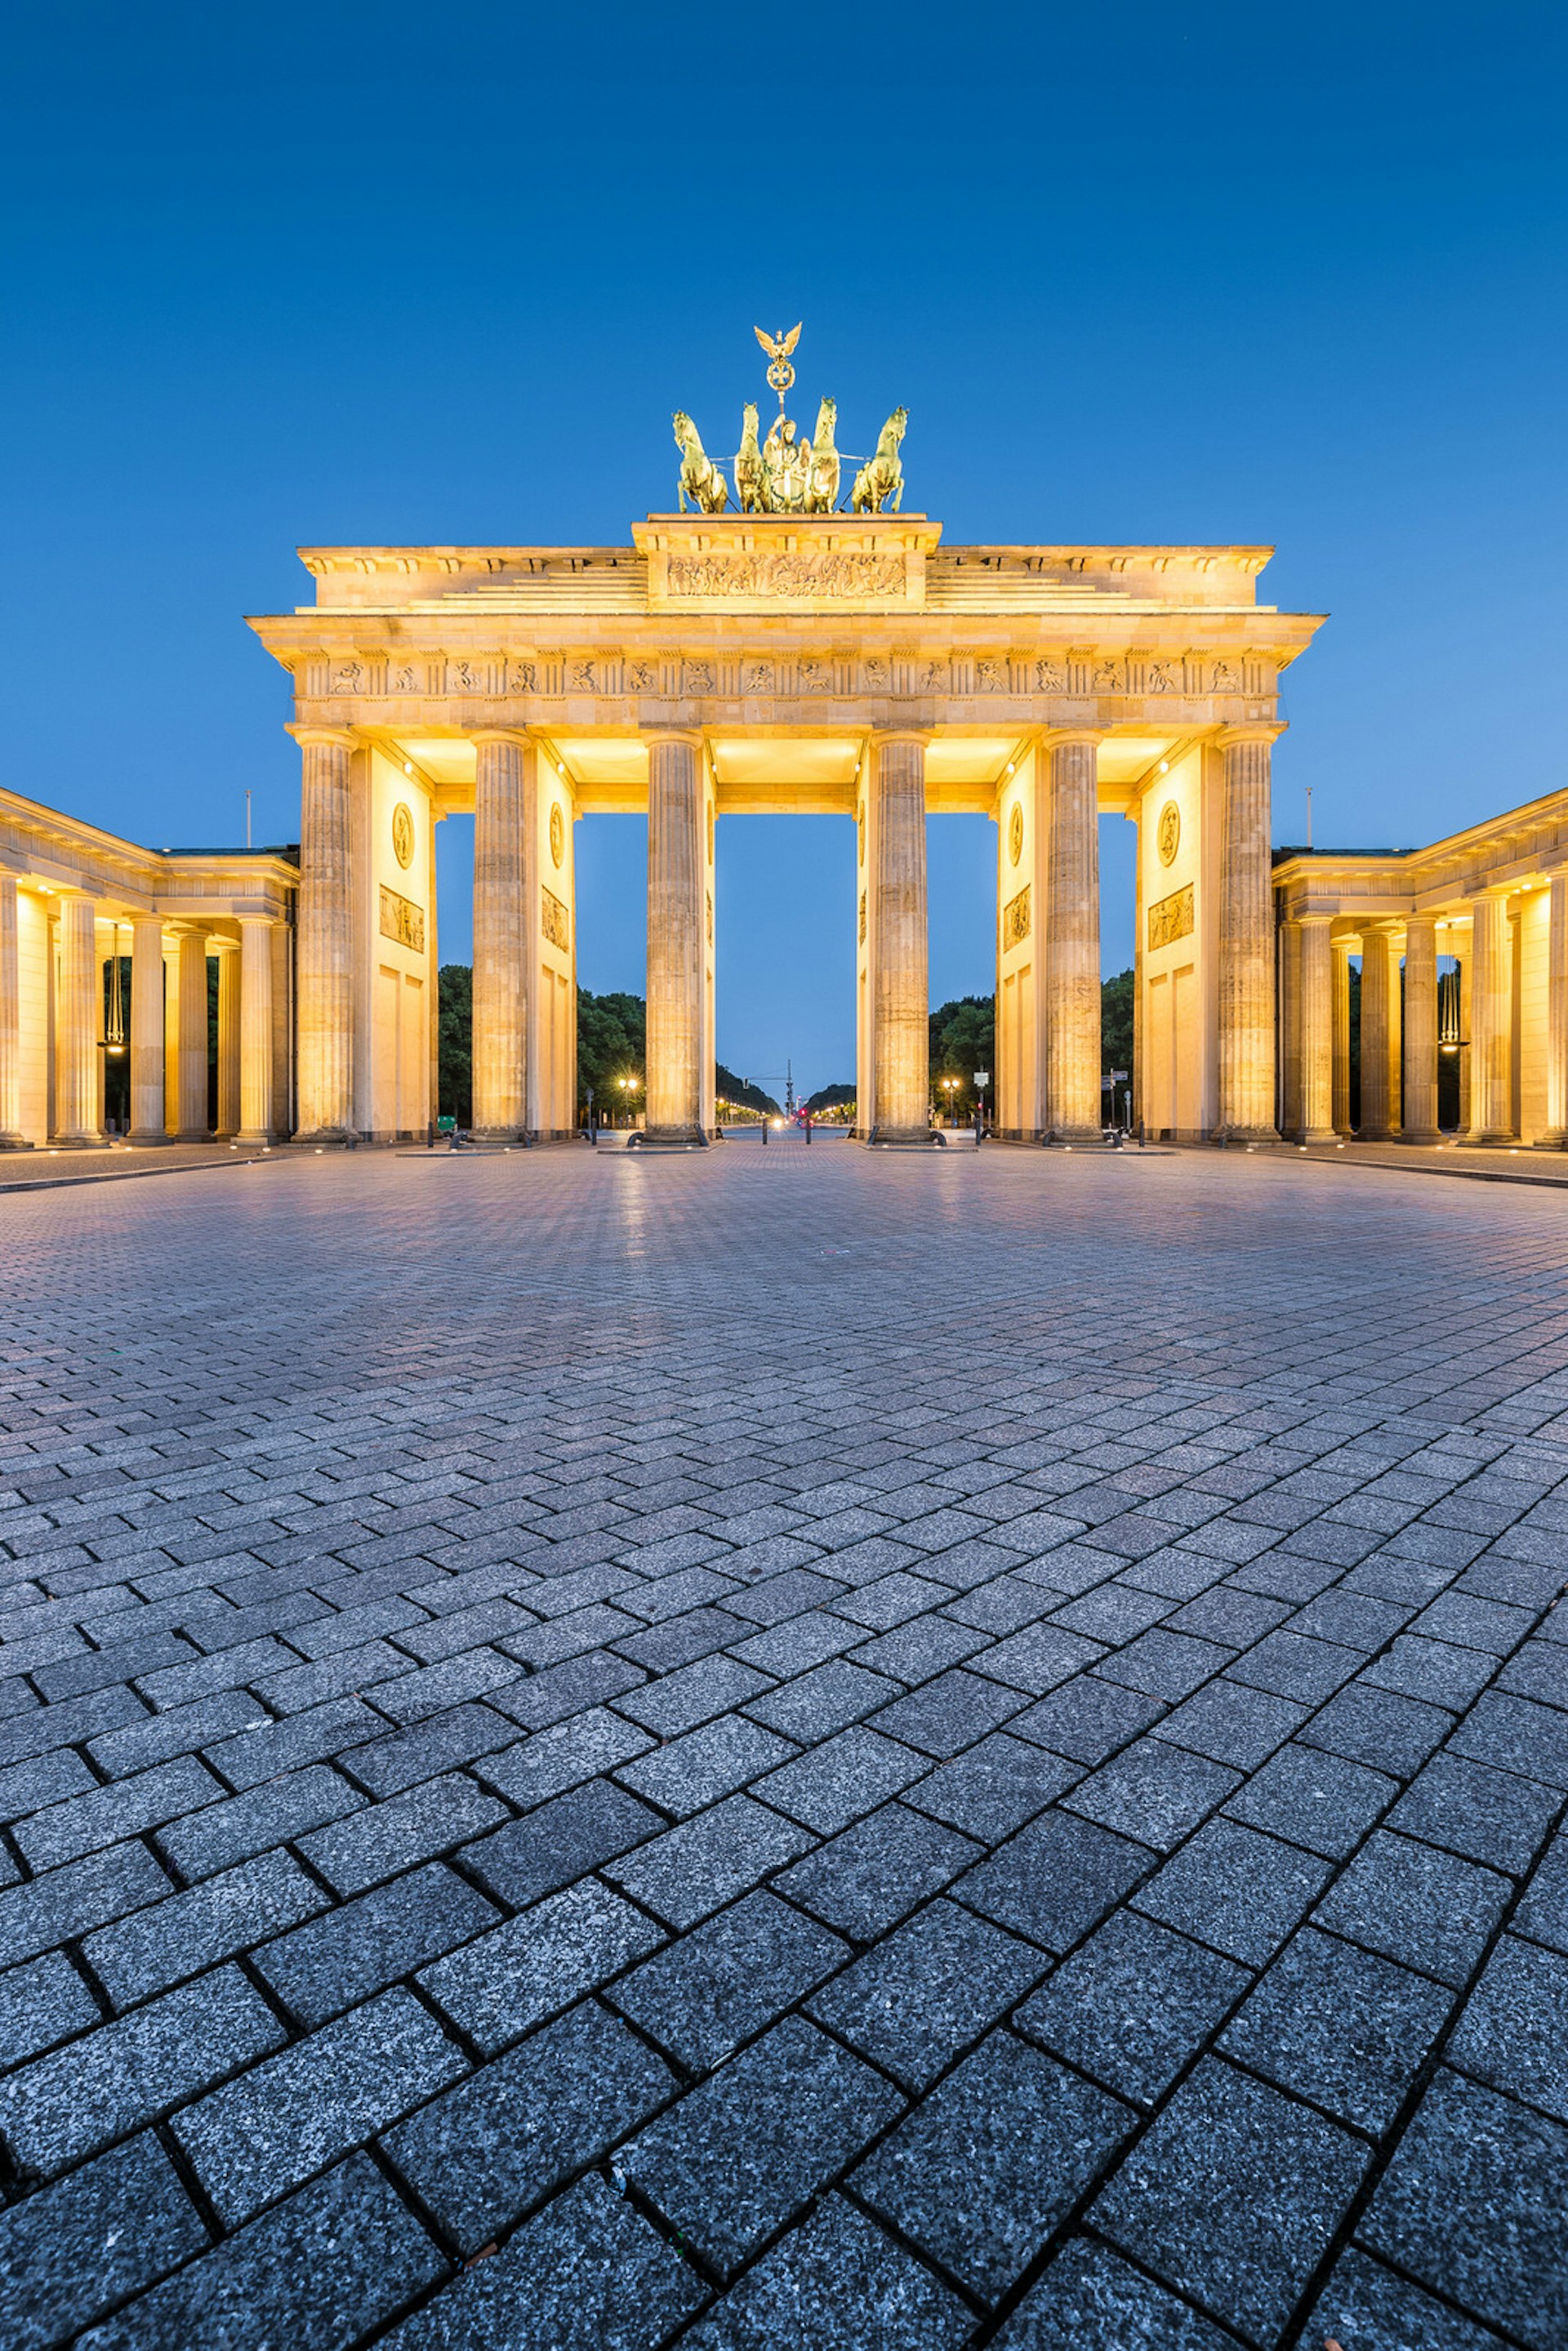 Free Berlin - Classic vertical view of historic Brandenburg Gate, Germany's most famous landmark and a national symbol, in post sunset twilight during blue hour at dusk in summer, central Berlin, Germany